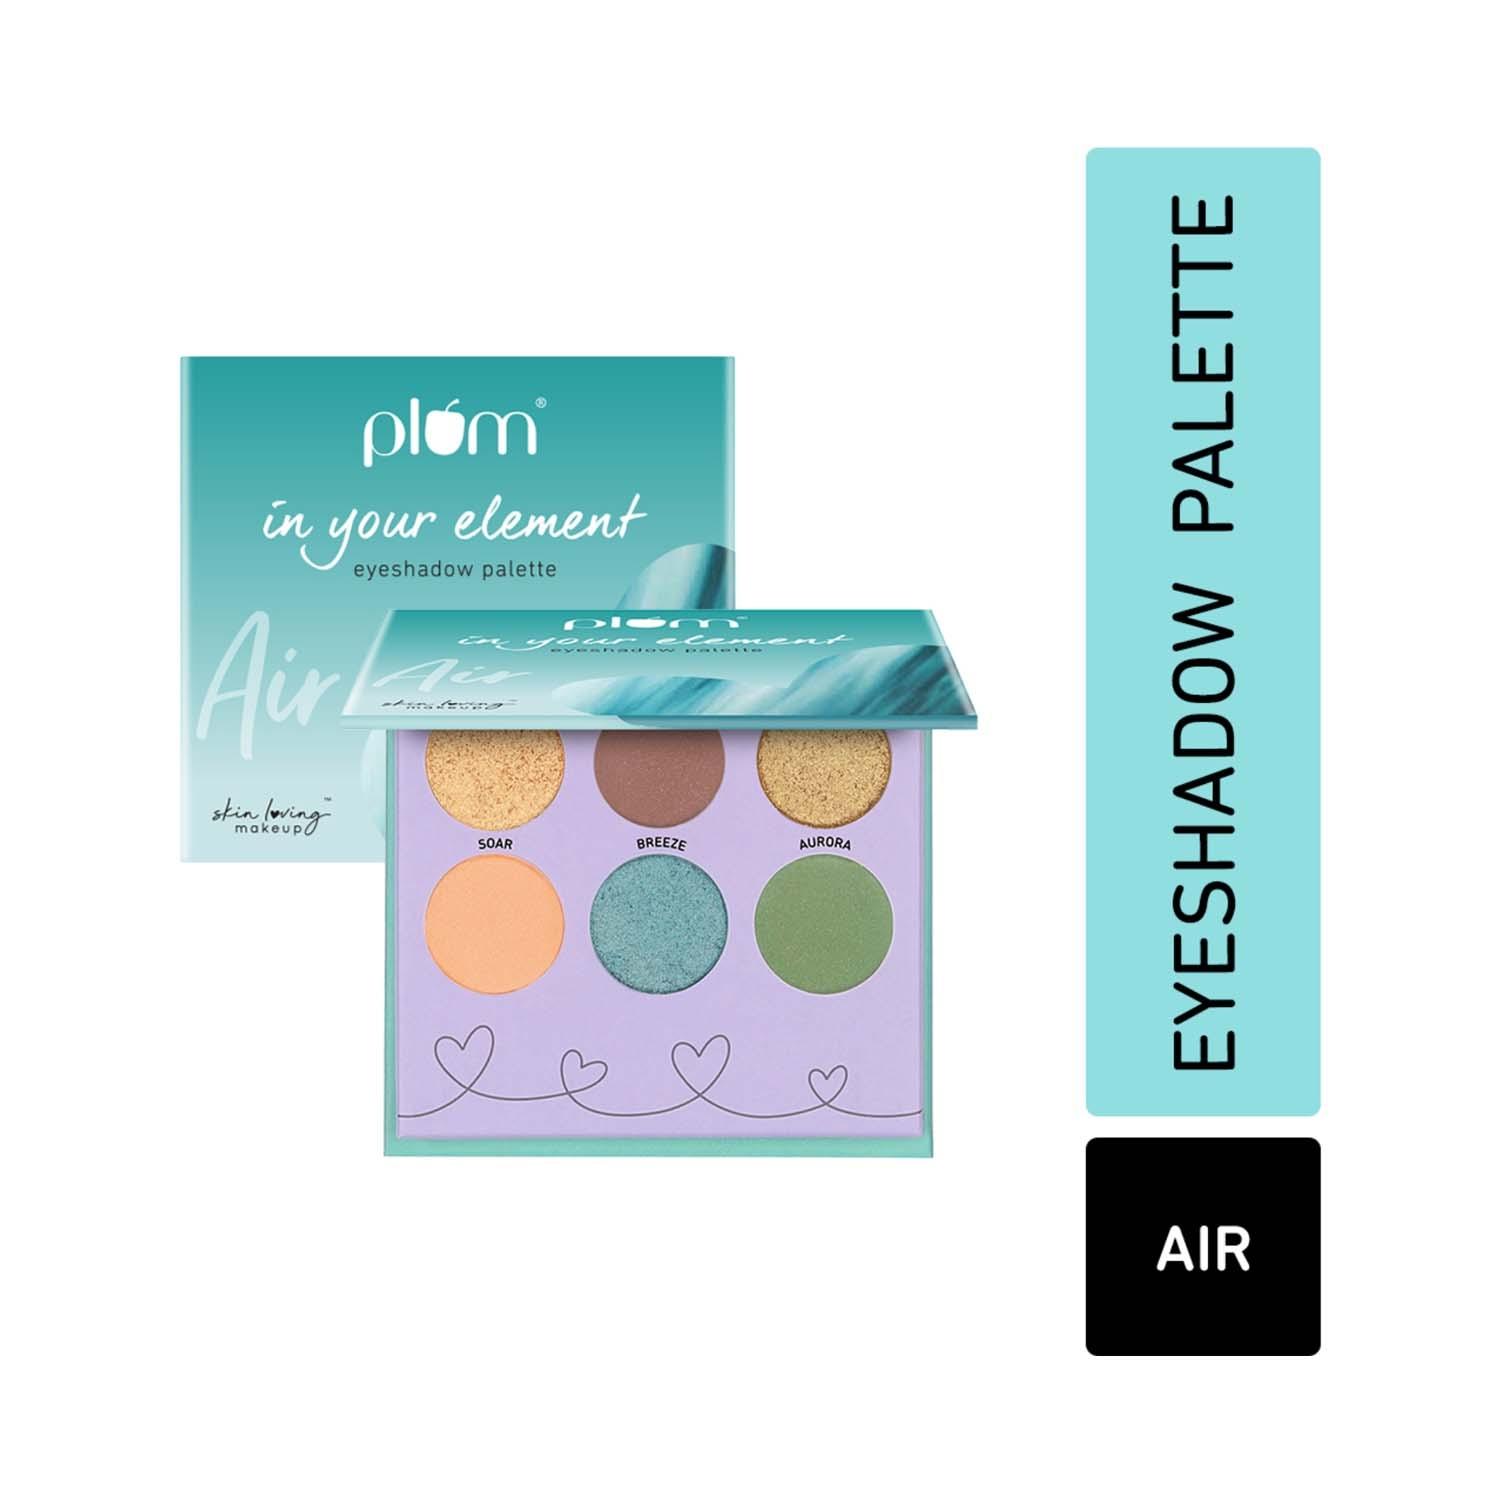 plum 6-in-1 super pigmented in your element eyeshadow palette - 04 air (10g)